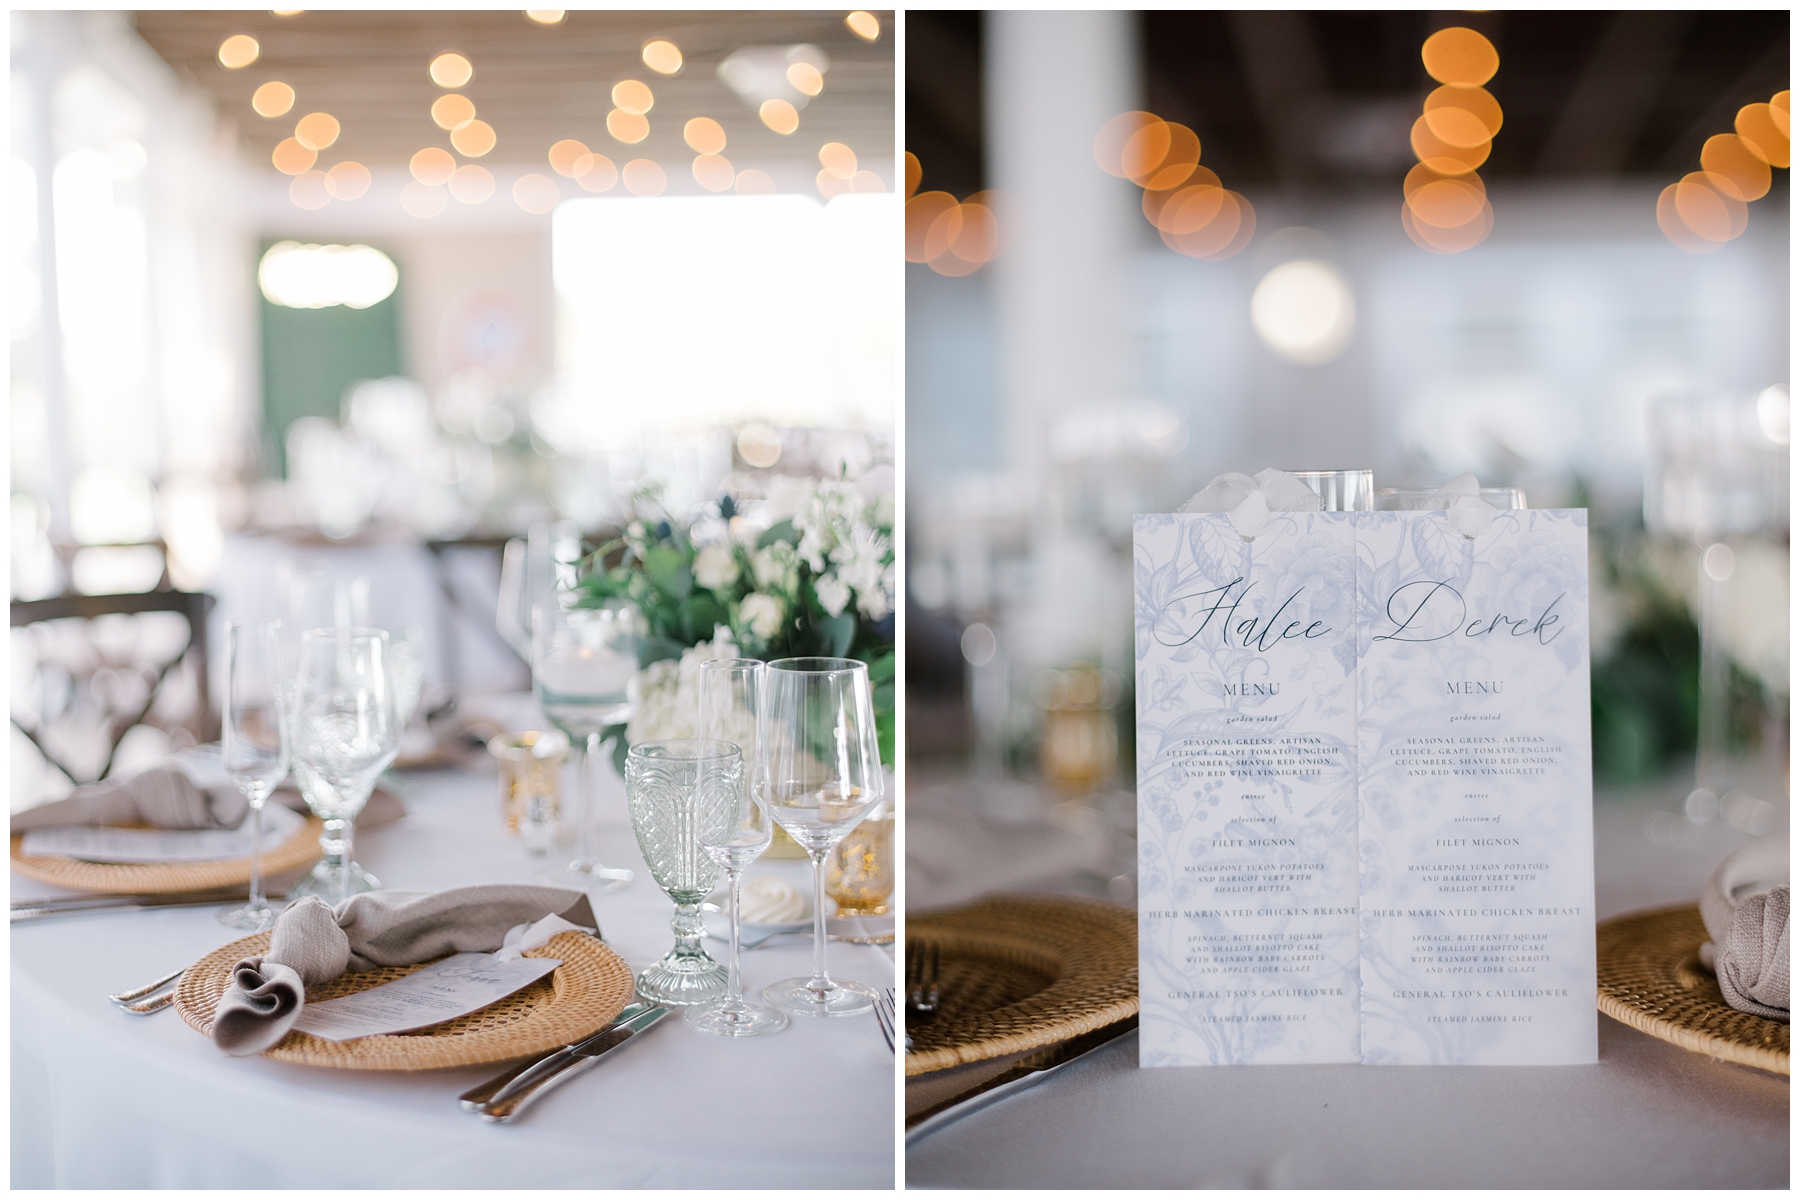 wedding details from romantic waterfront wedding venue, Shining Tides